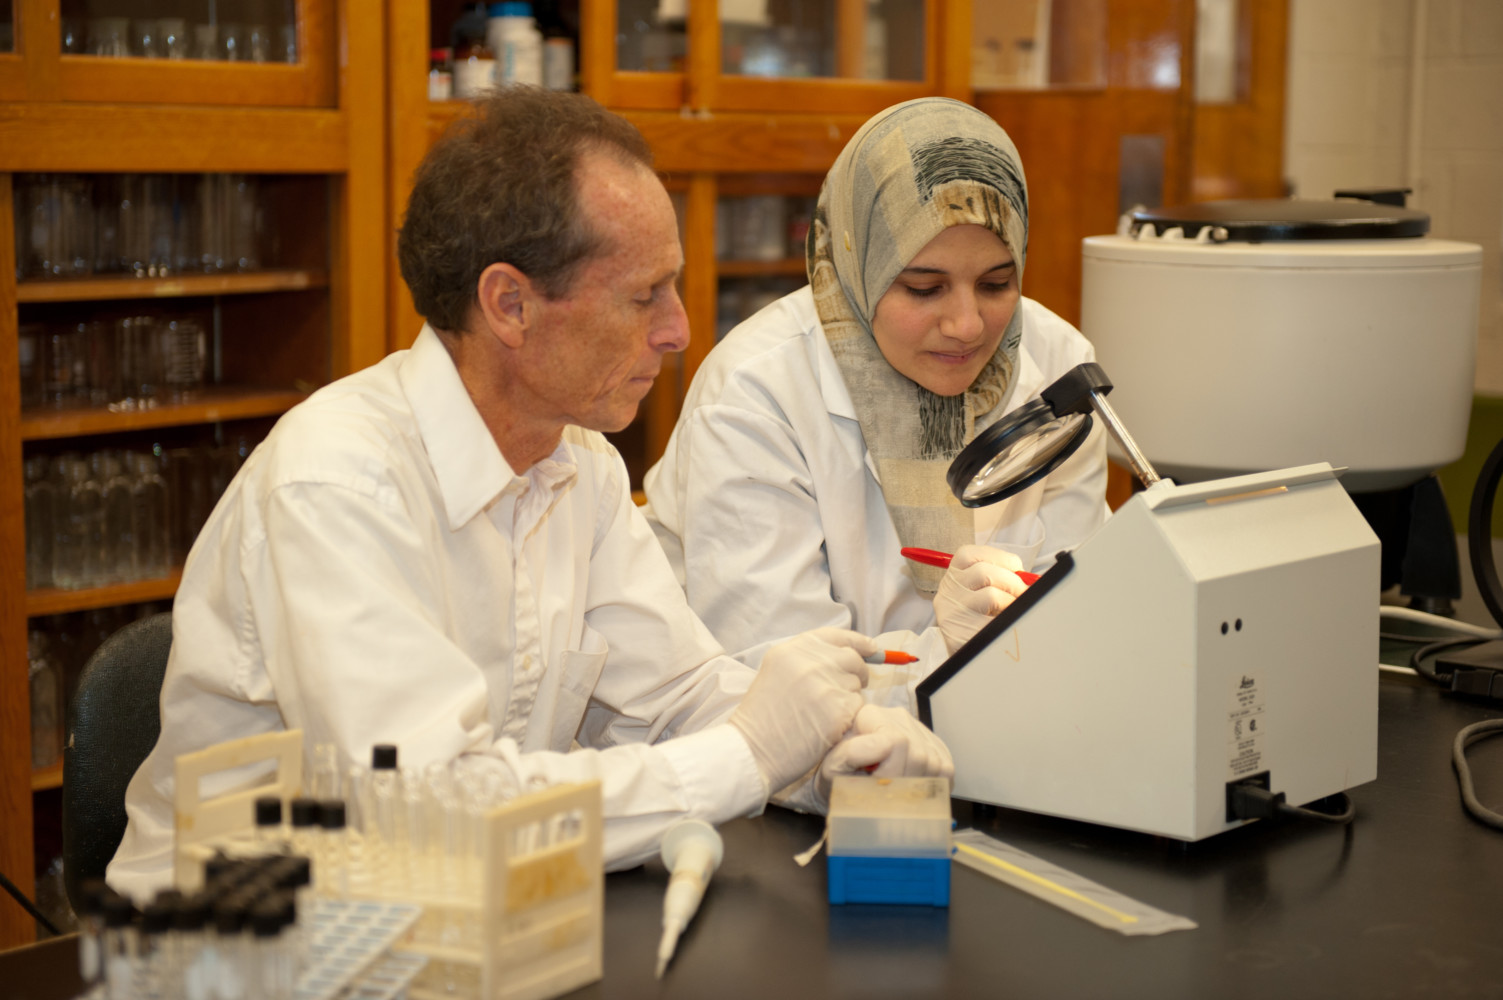 Professor Paul Dawson is seated at a lab table looking at a microscope with one of his graduate students